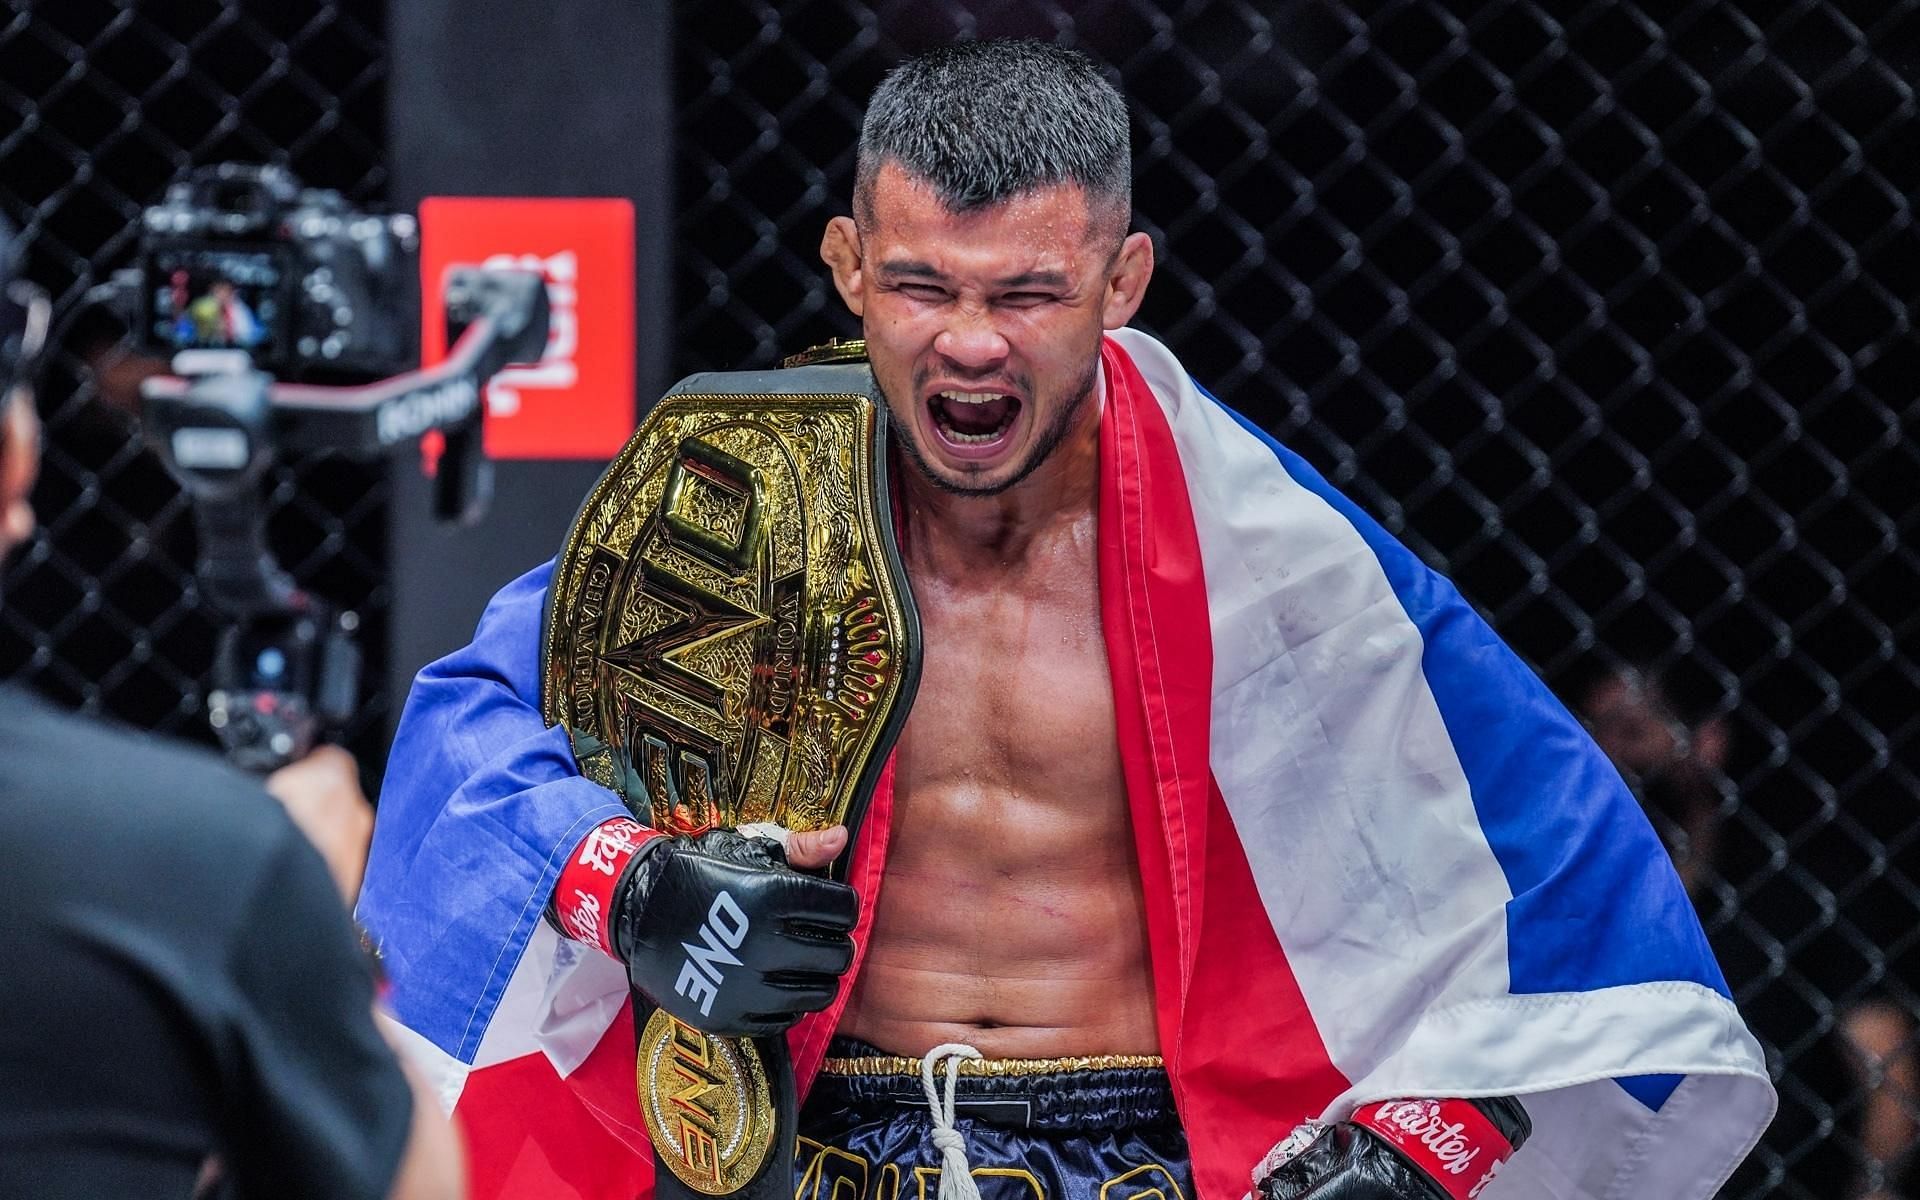 ONE bantamweight Muay Thai champion Nong-O Gaiyanghadao is open to mixed-rules bouts in the future. [Image courtesy of ONE Championship]